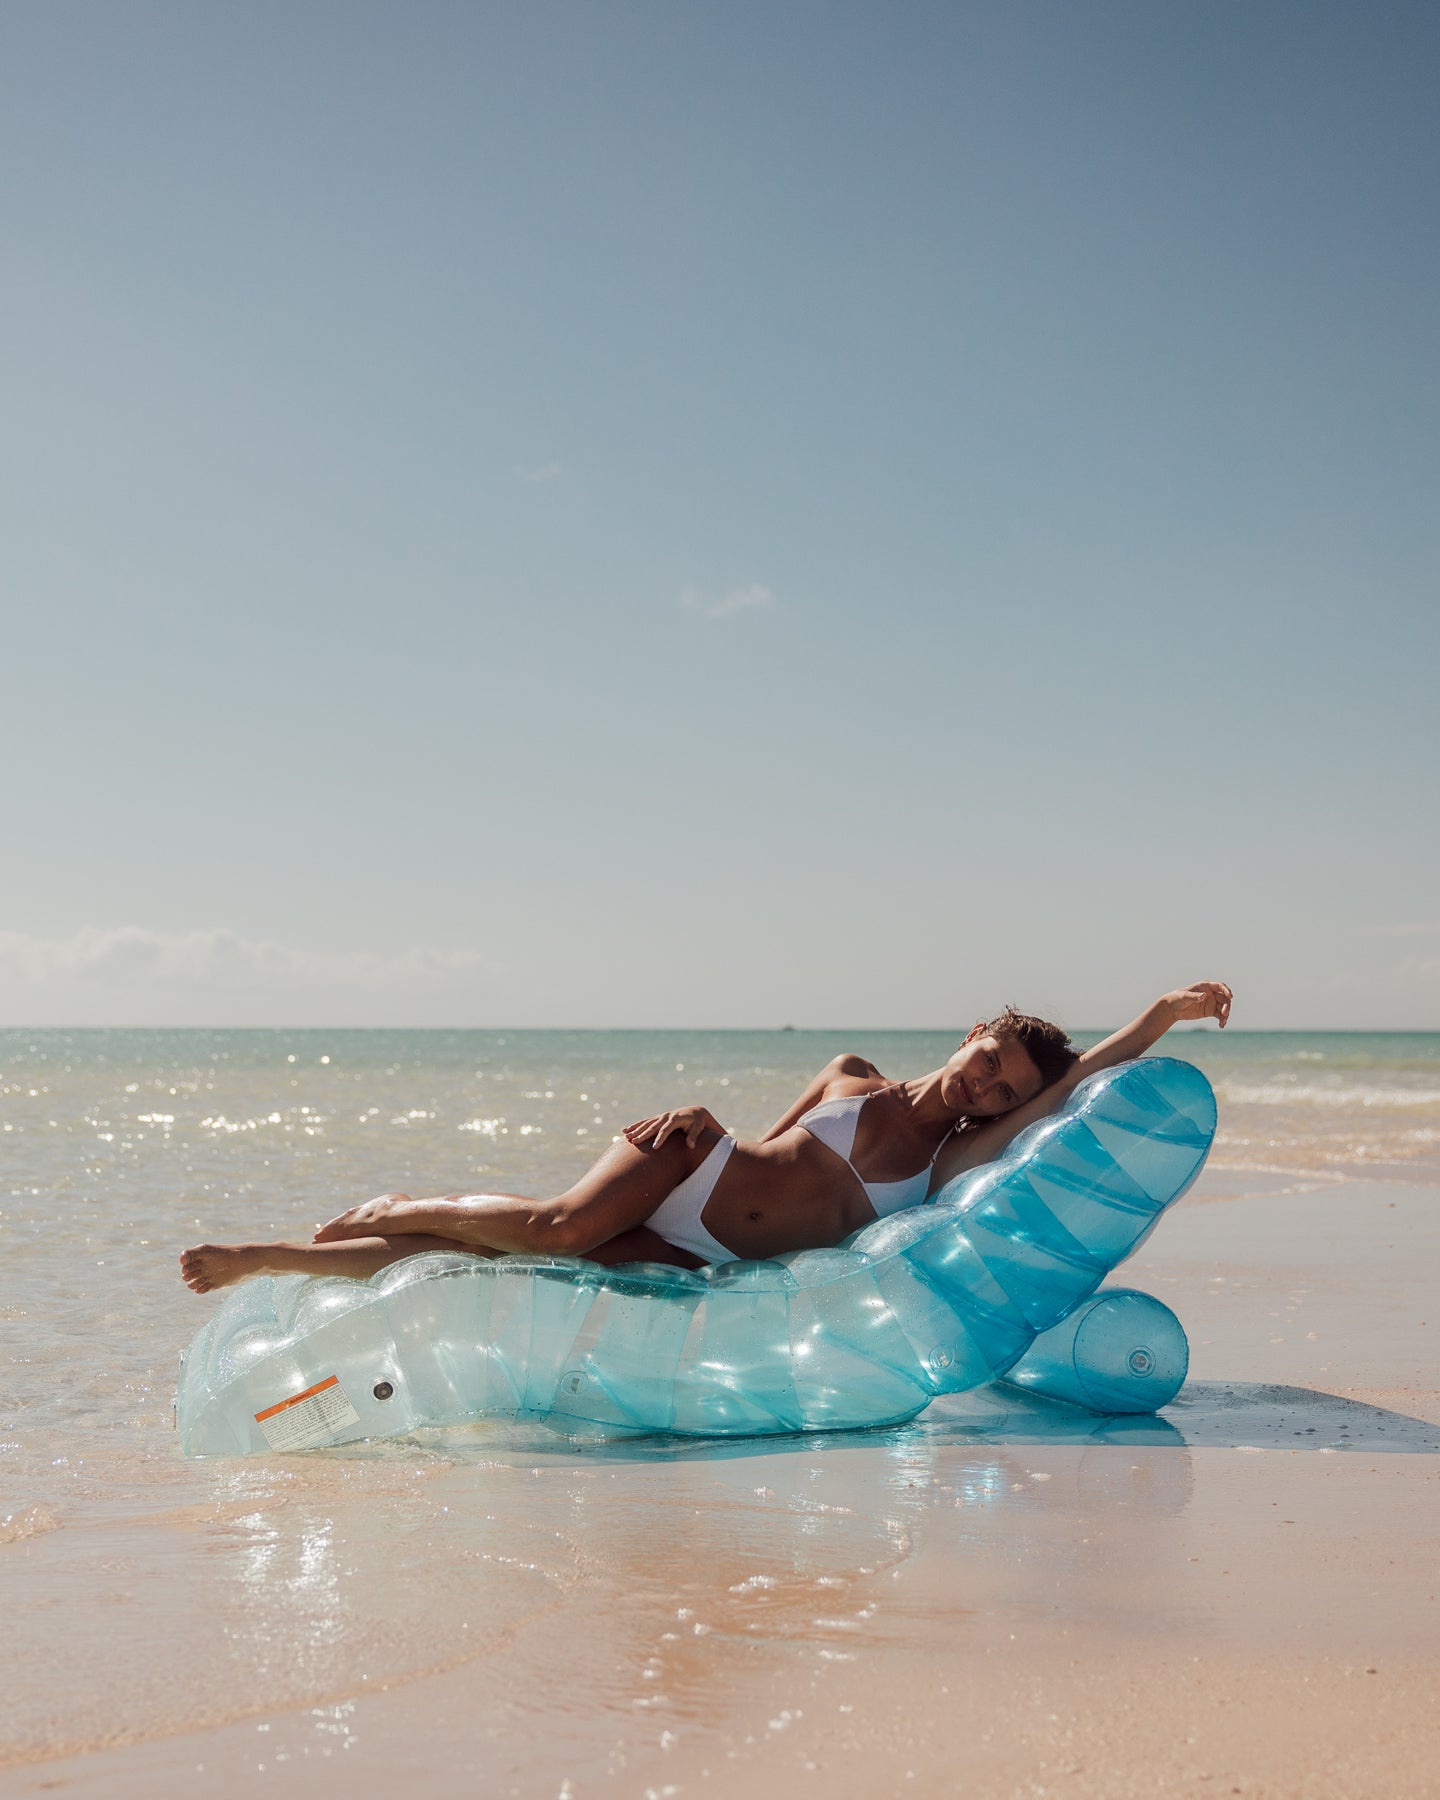 Best Pool Float - Blue Chaise Lounger